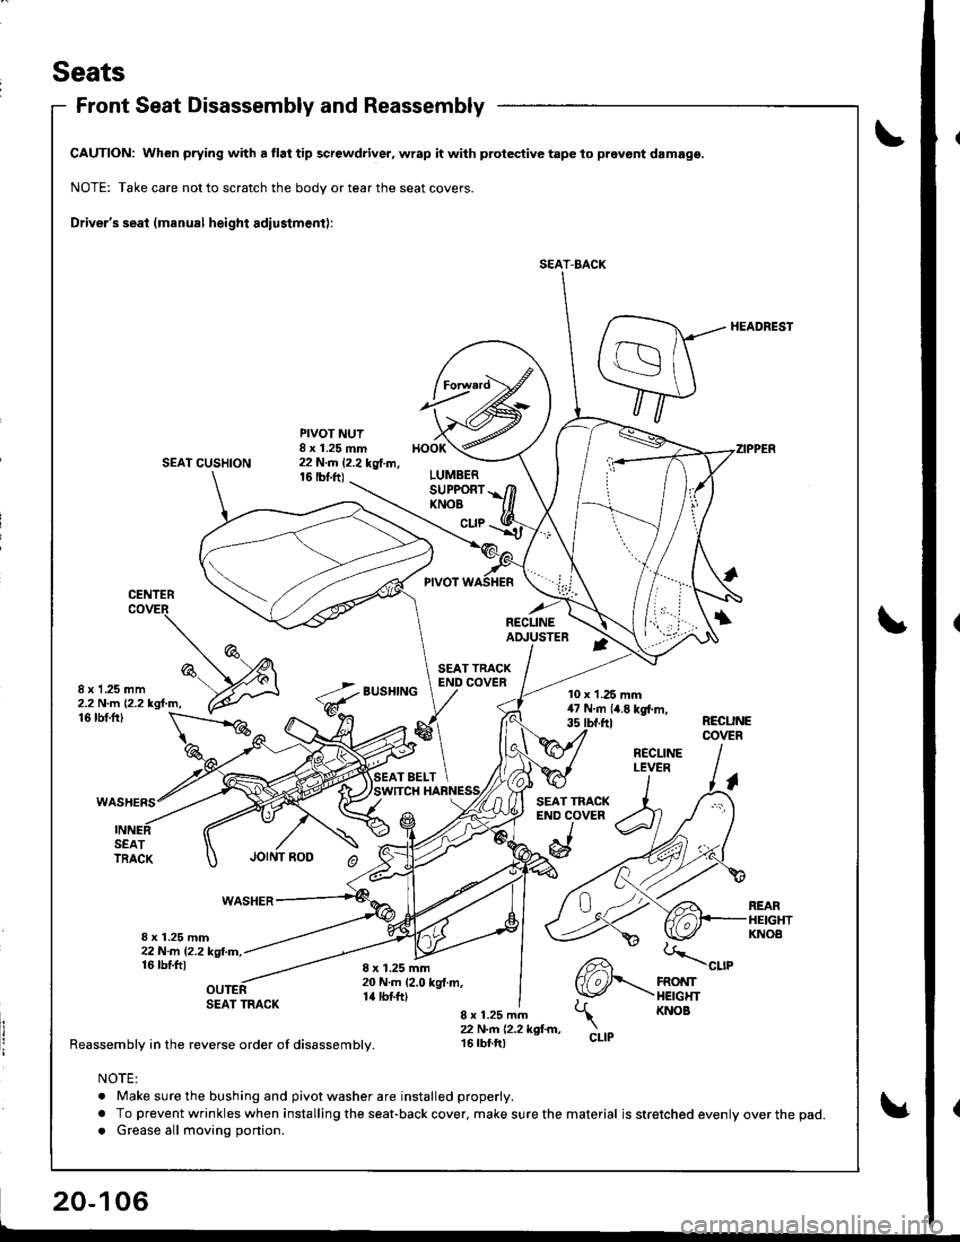 HONDA INTEGRA 1998 4.G Workshop Manual Seats
Front Seat Disassembly and Reassembly
CAUTION: When prying with a tlat tip screwdriver, wrap it with protective tape to pravont damage.
NOTE: Take care not to scratch the body or tear the seat c